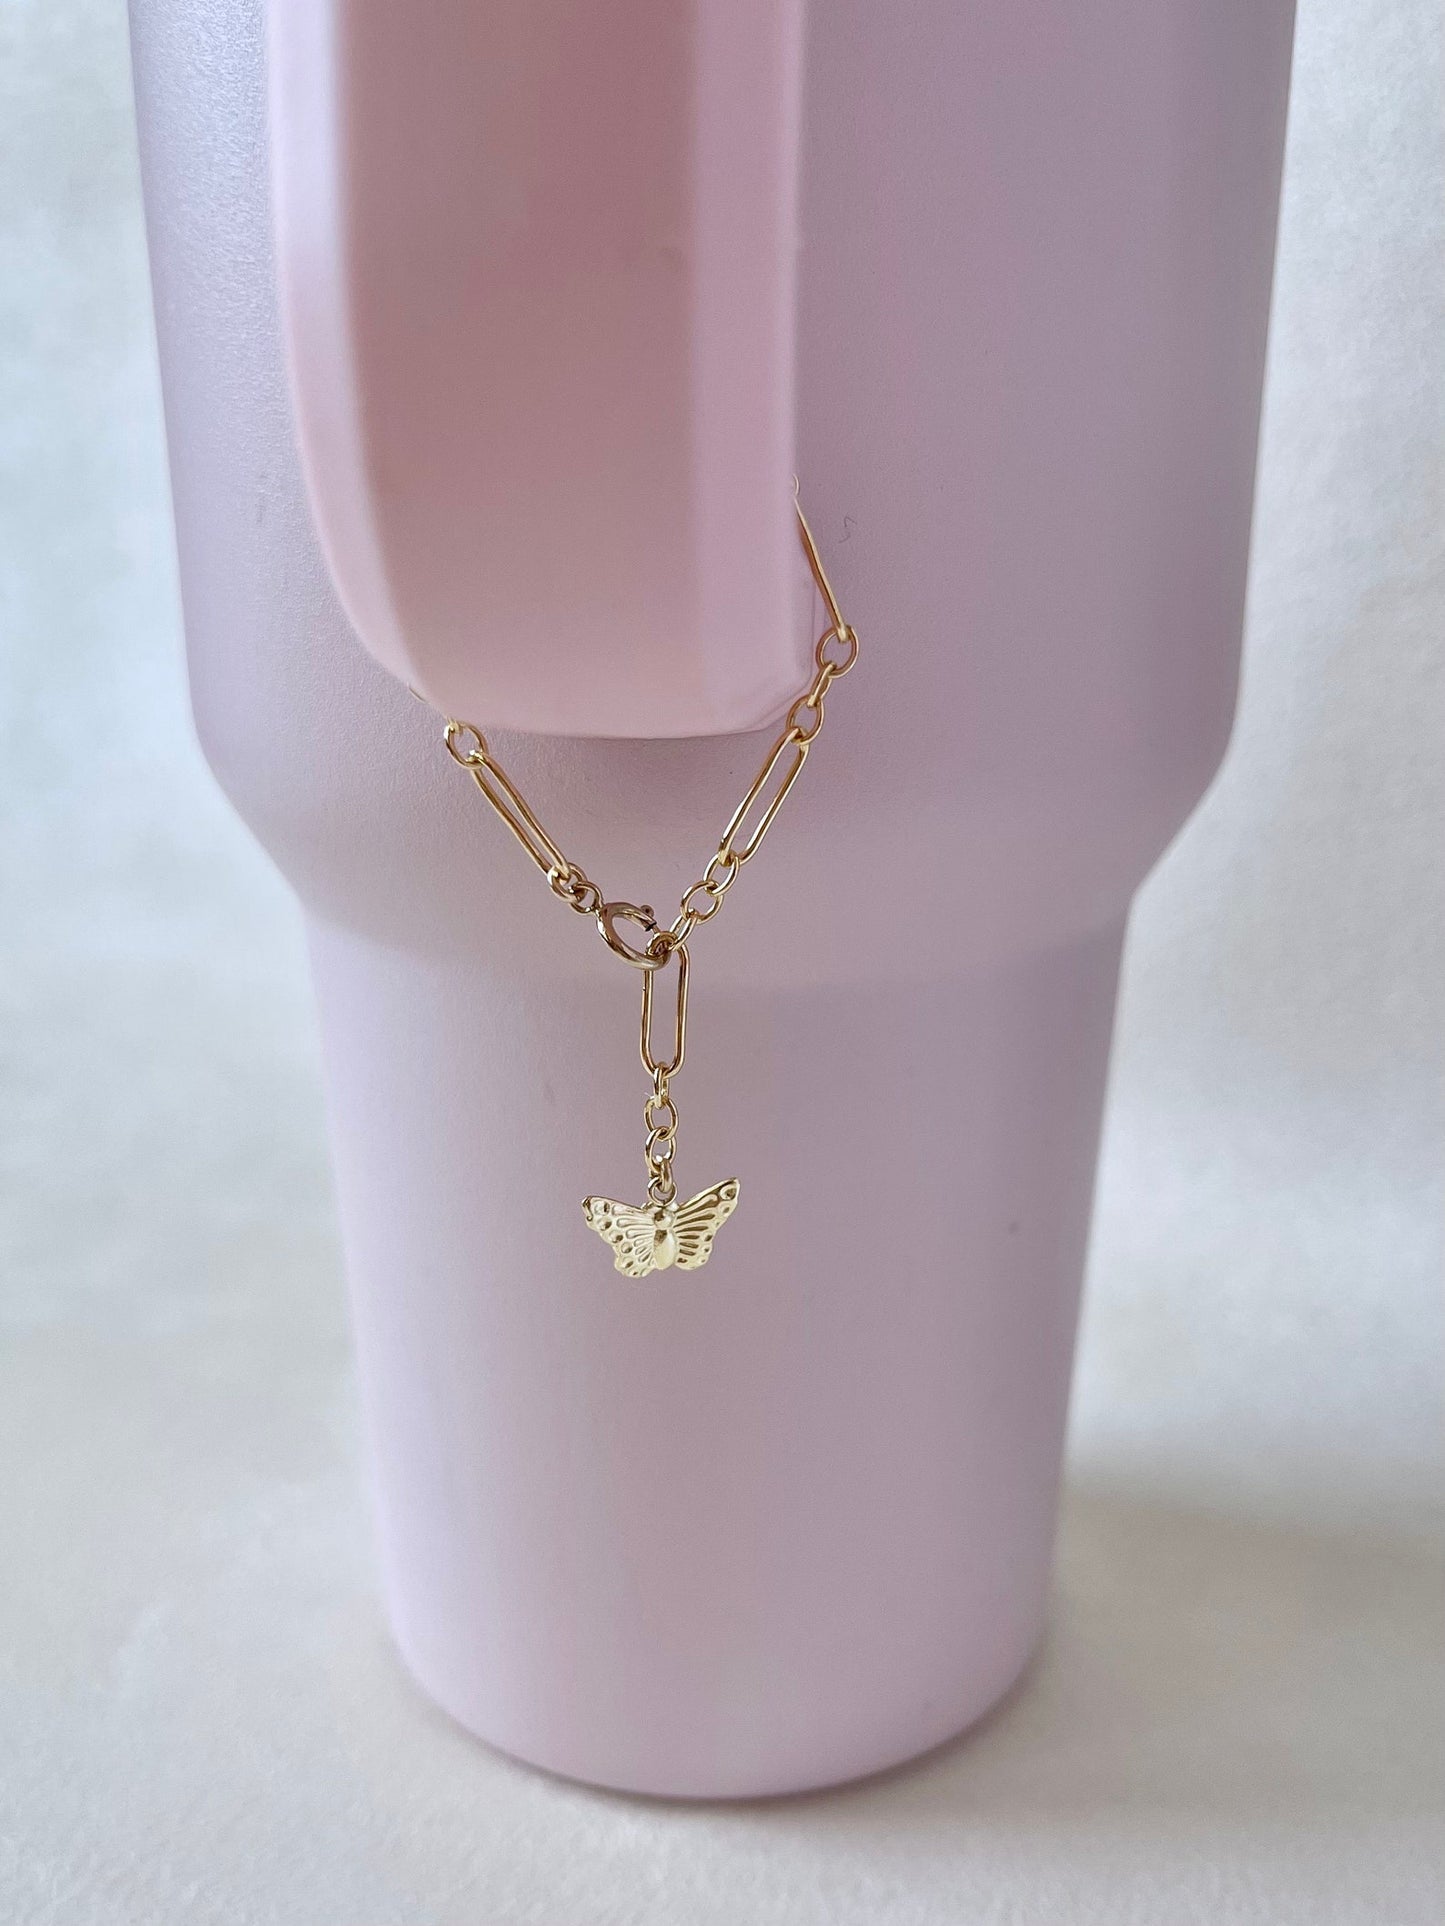 Heart Stanley Cup Charm – Sugar Fairy Jewelry